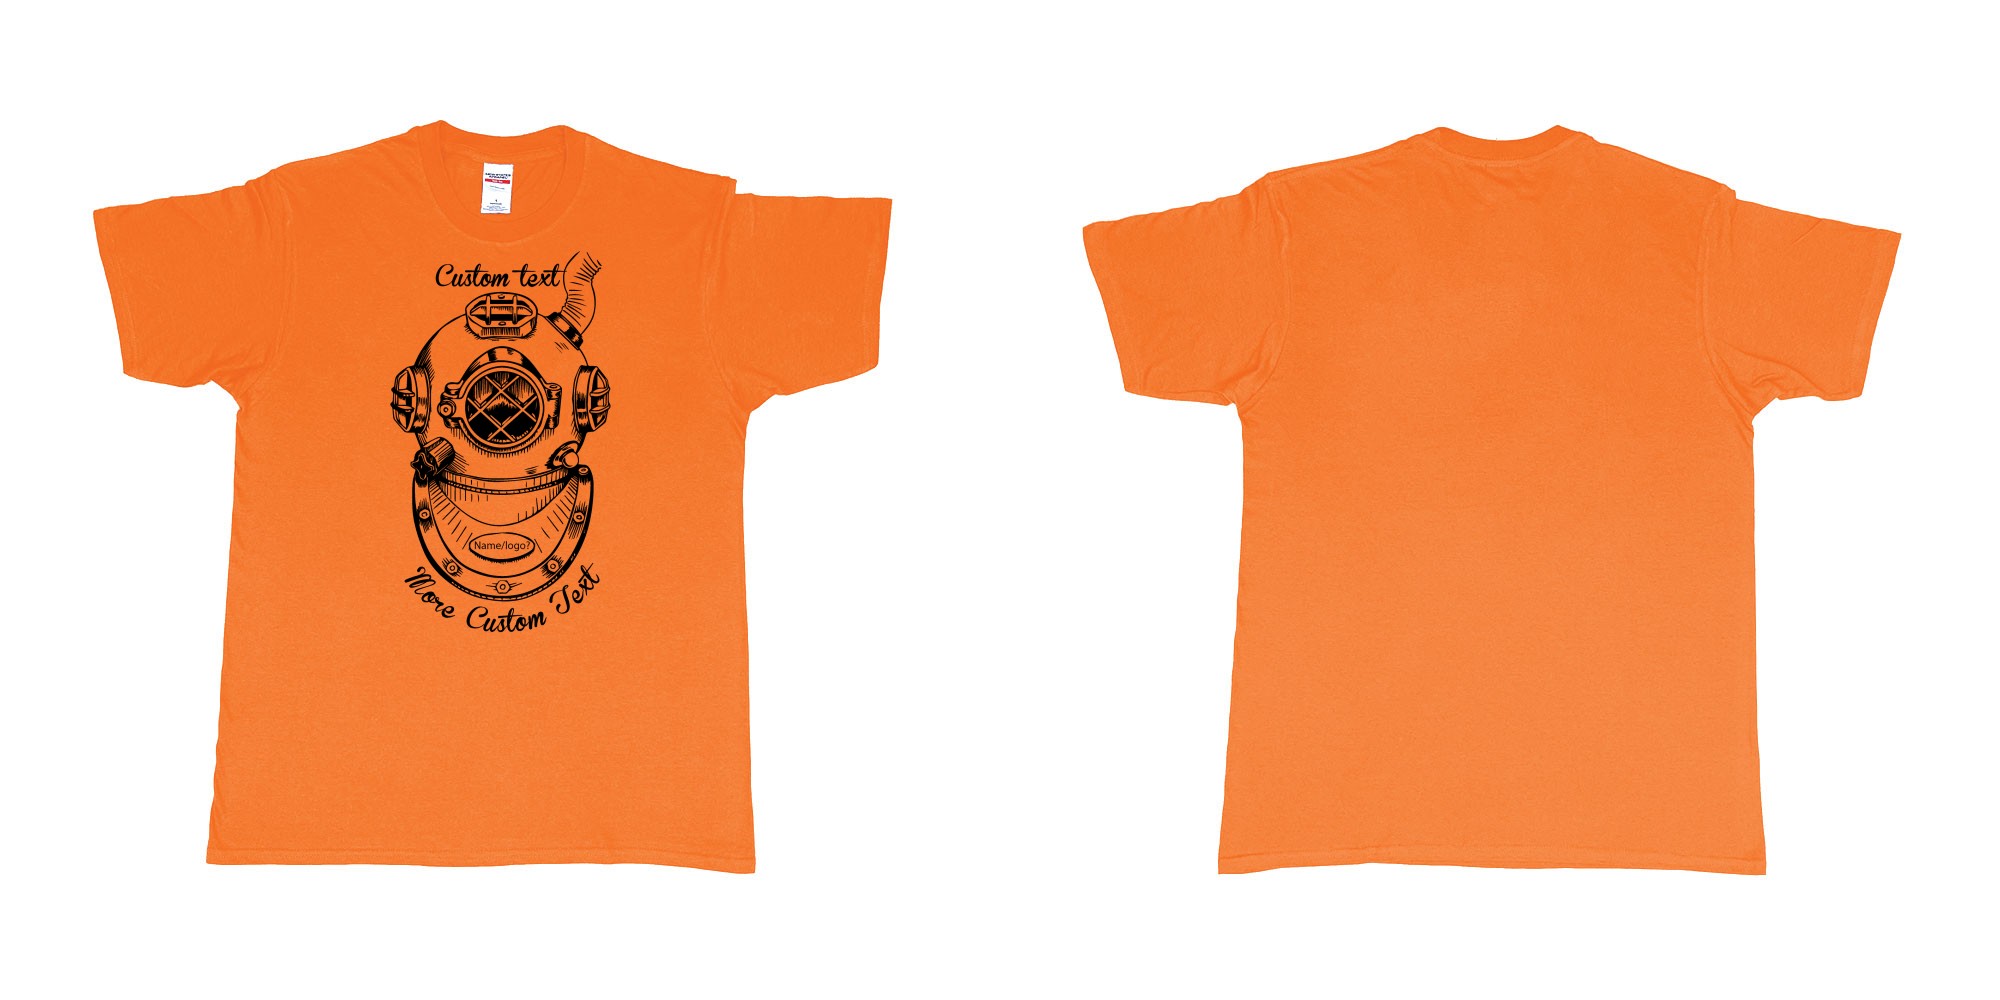 Custom tshirt design old school diving helmet custom own text dtg printing bali in fabric color orange choice your own text made in Bali by The Pirate Way